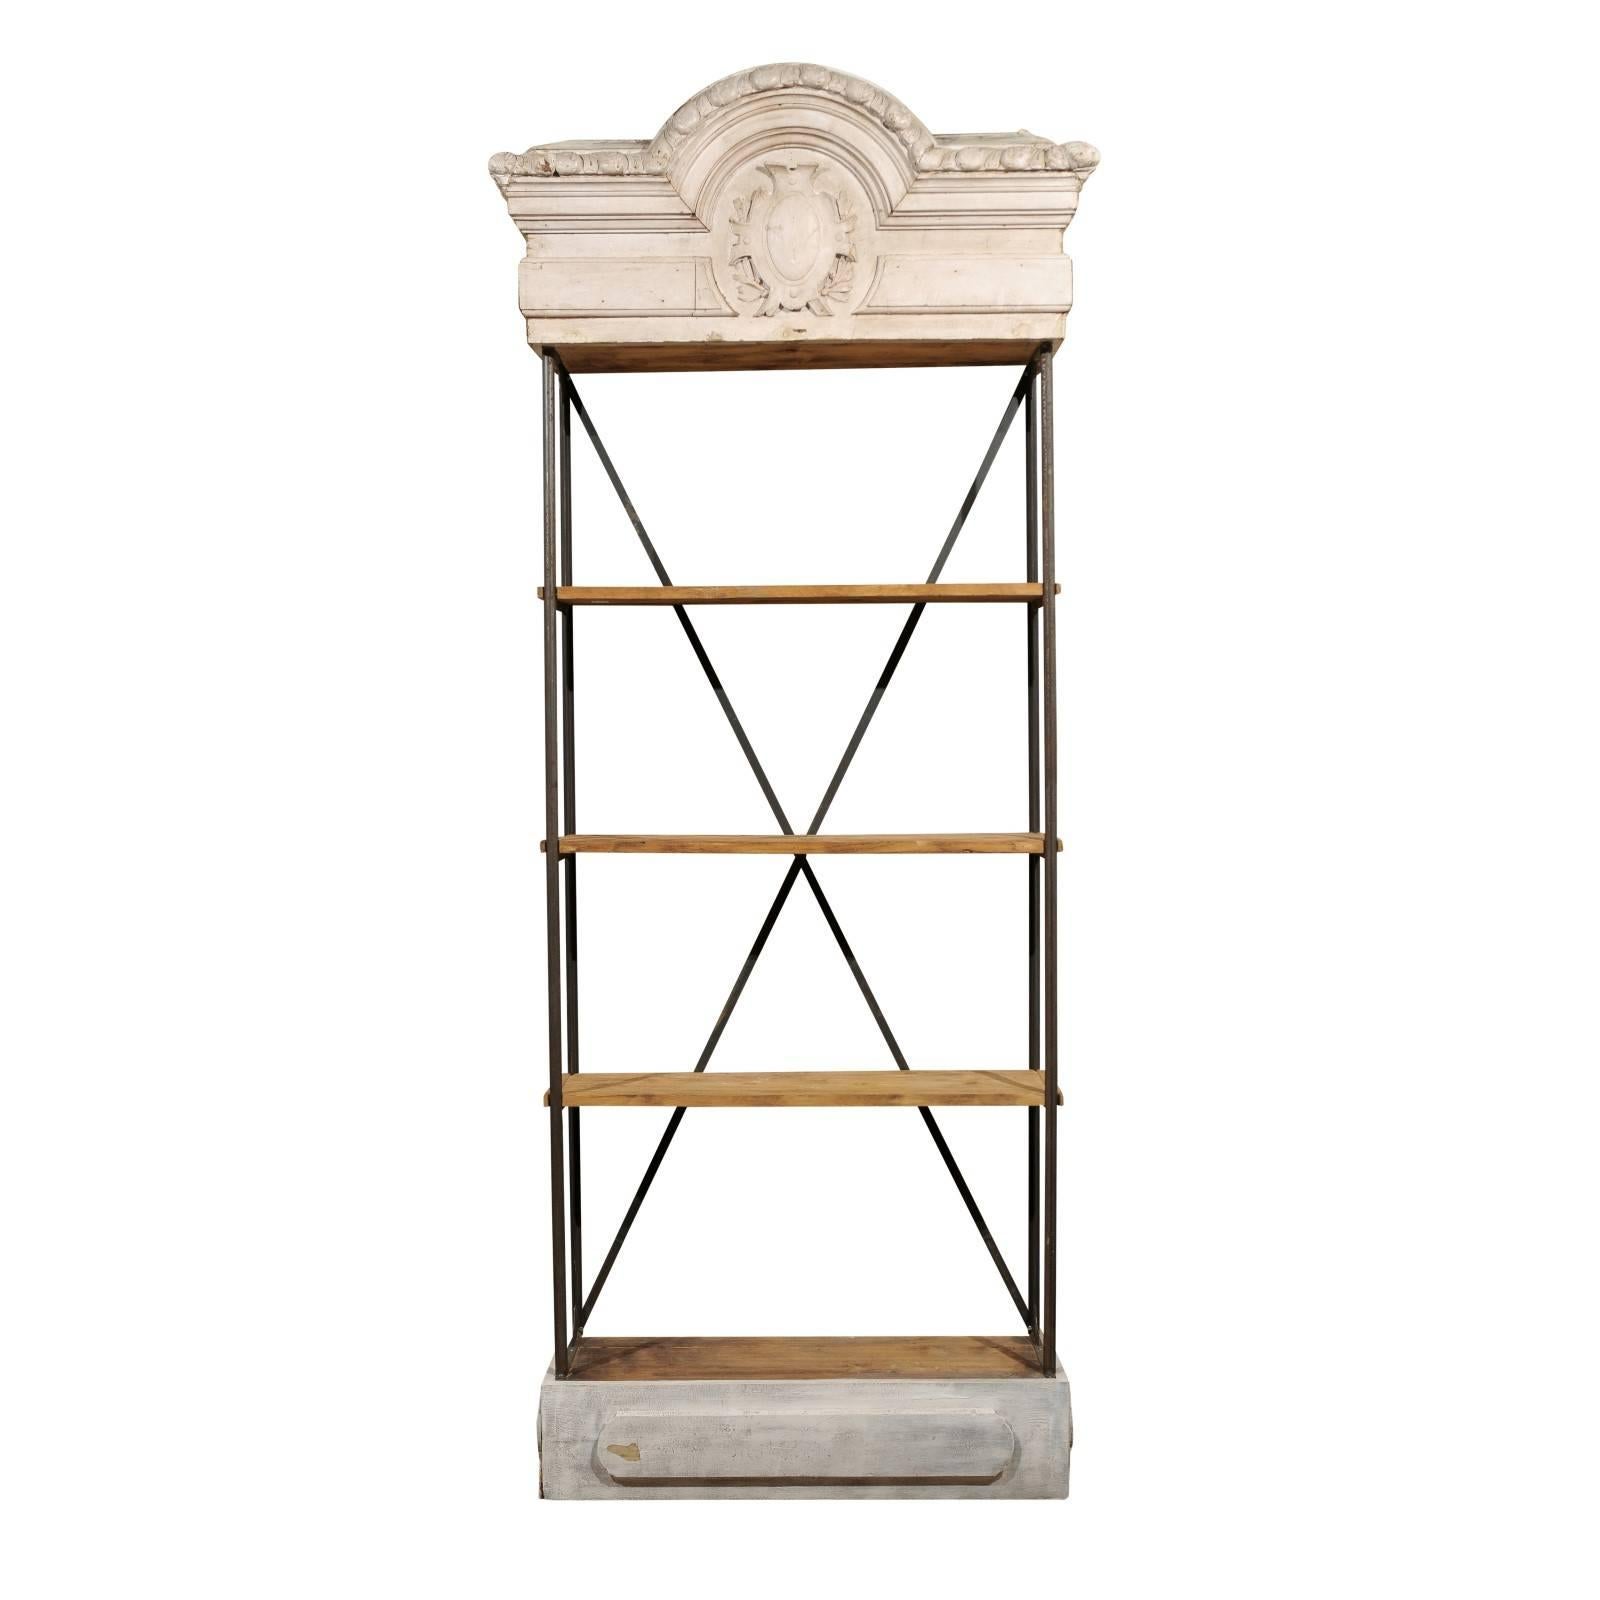 Tall Iron Bookcase Made Around Antique Painted Cornice For Sale